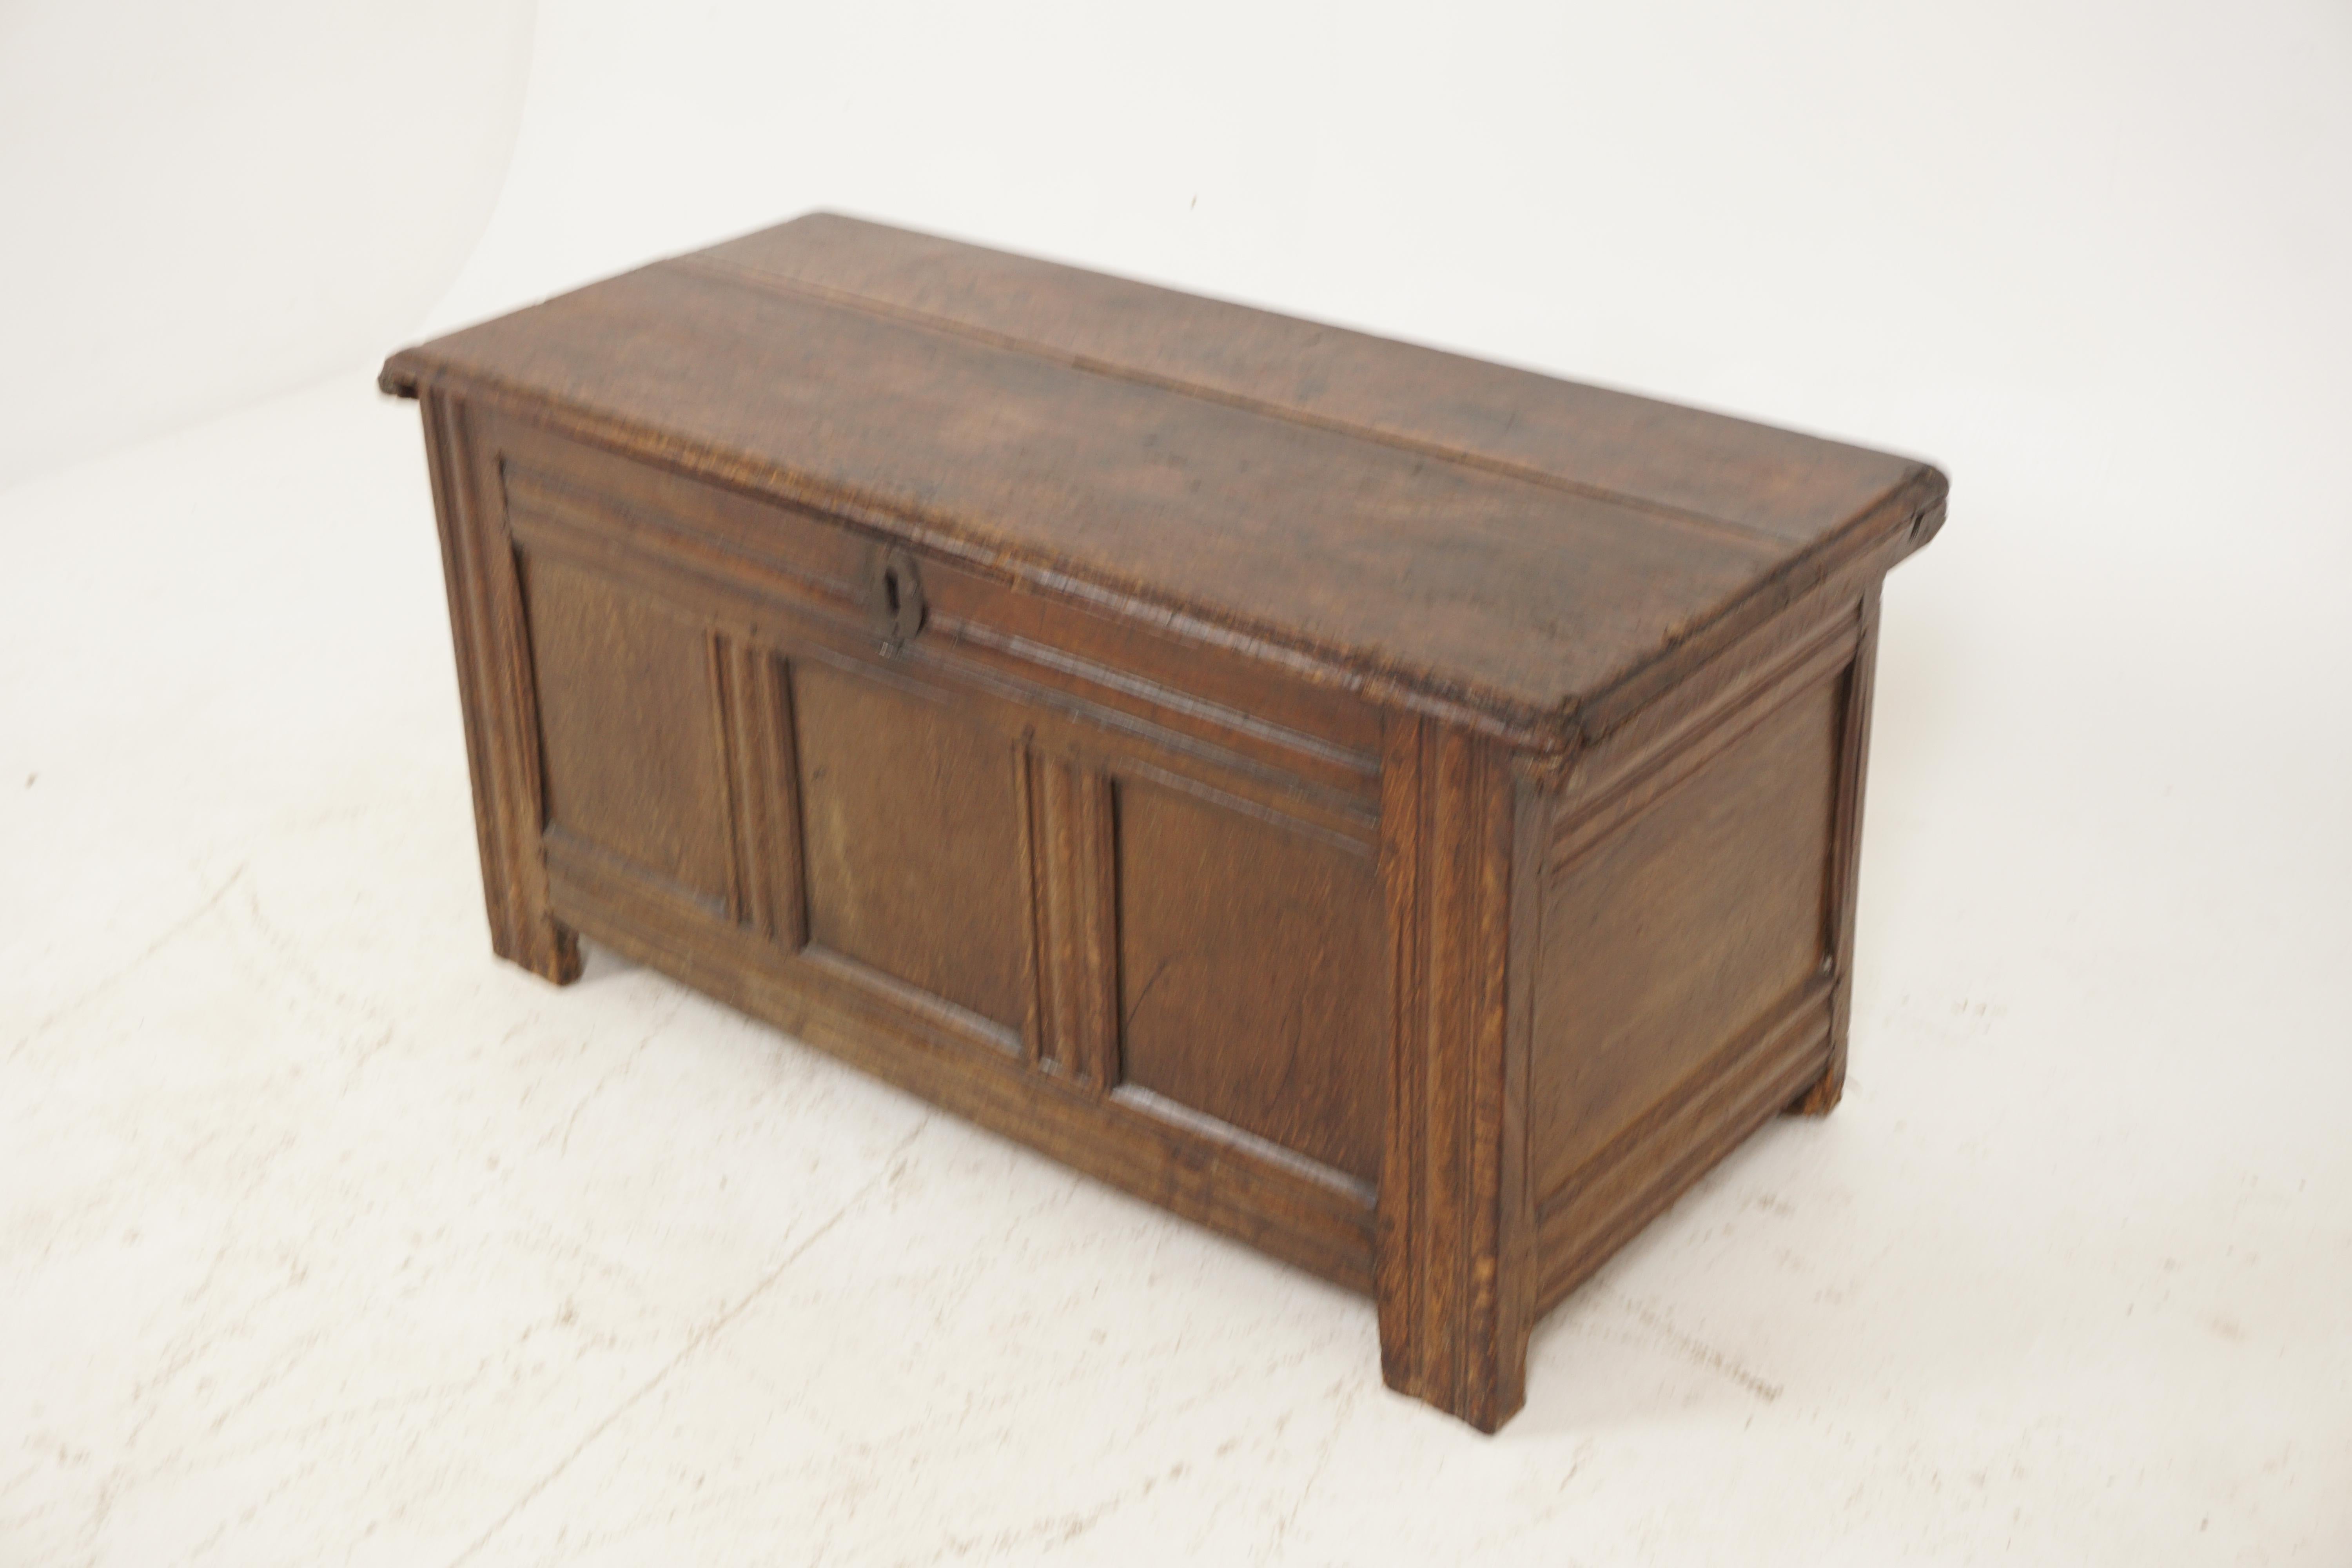 Antique Georgian three paneled oak coffer, blanket box, Scotland 1720, B2585

Scotland 1720
Solid oak
Original finish
Moulded top
Three insert panels to the front and sides
Peg and joined paneled design
Original iron loop hinges
All